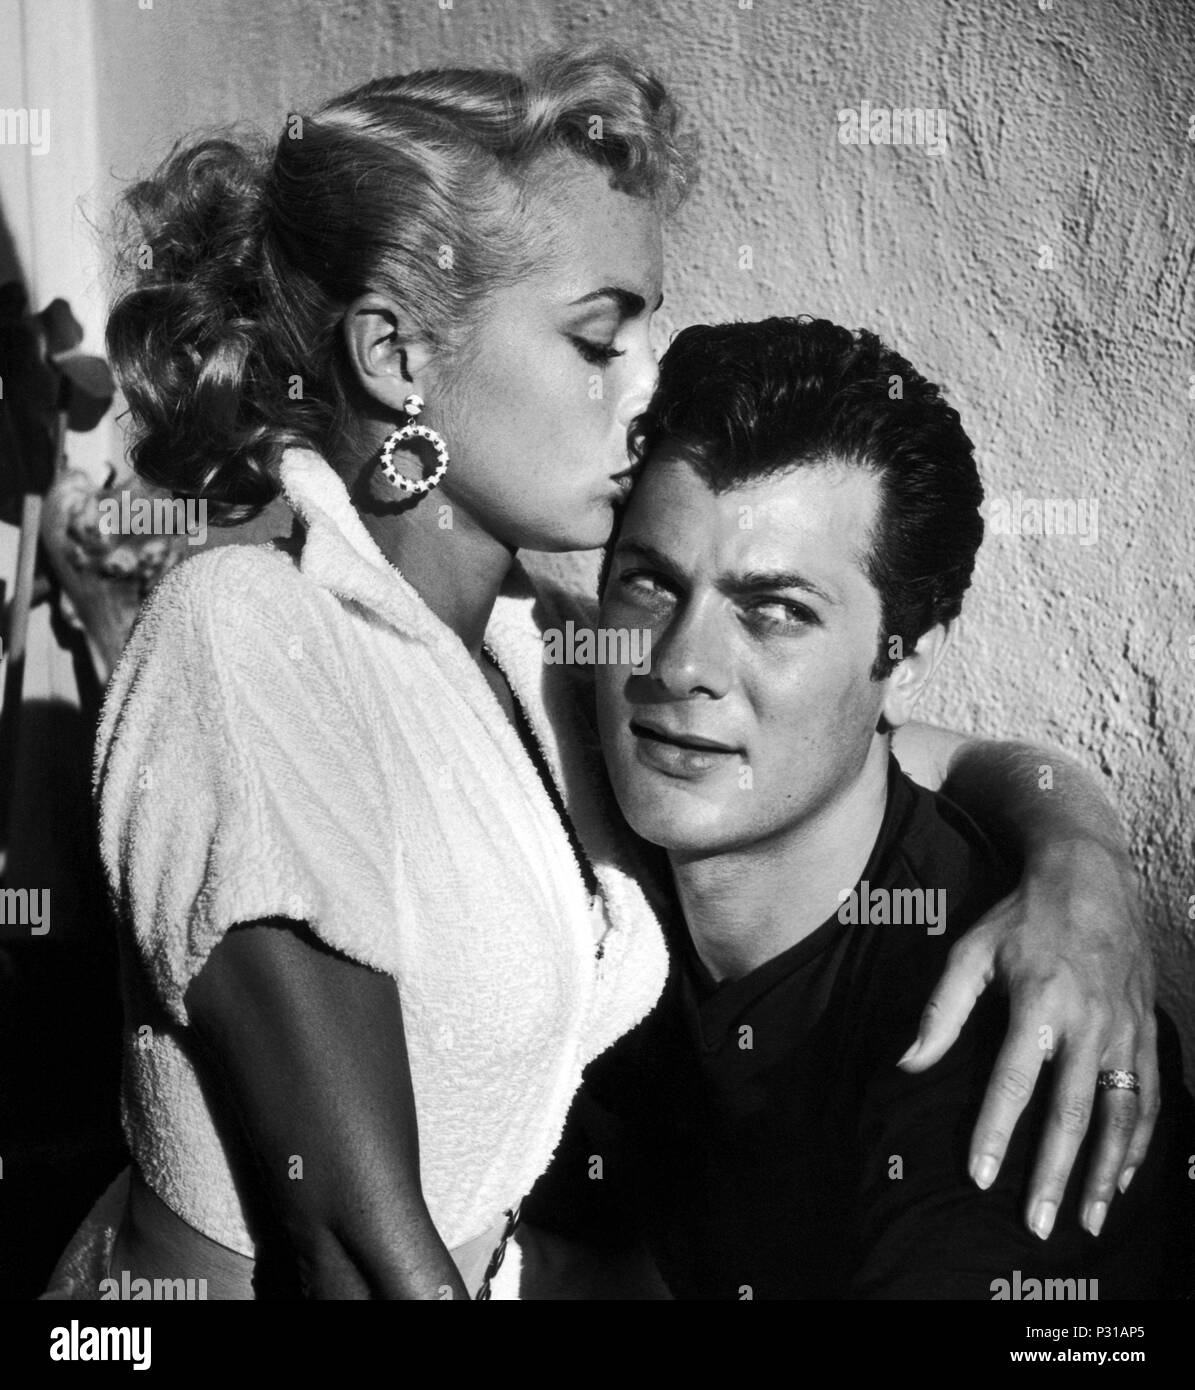 Stars : Tony Curtis, JANET LEIGH. Banque D'Images